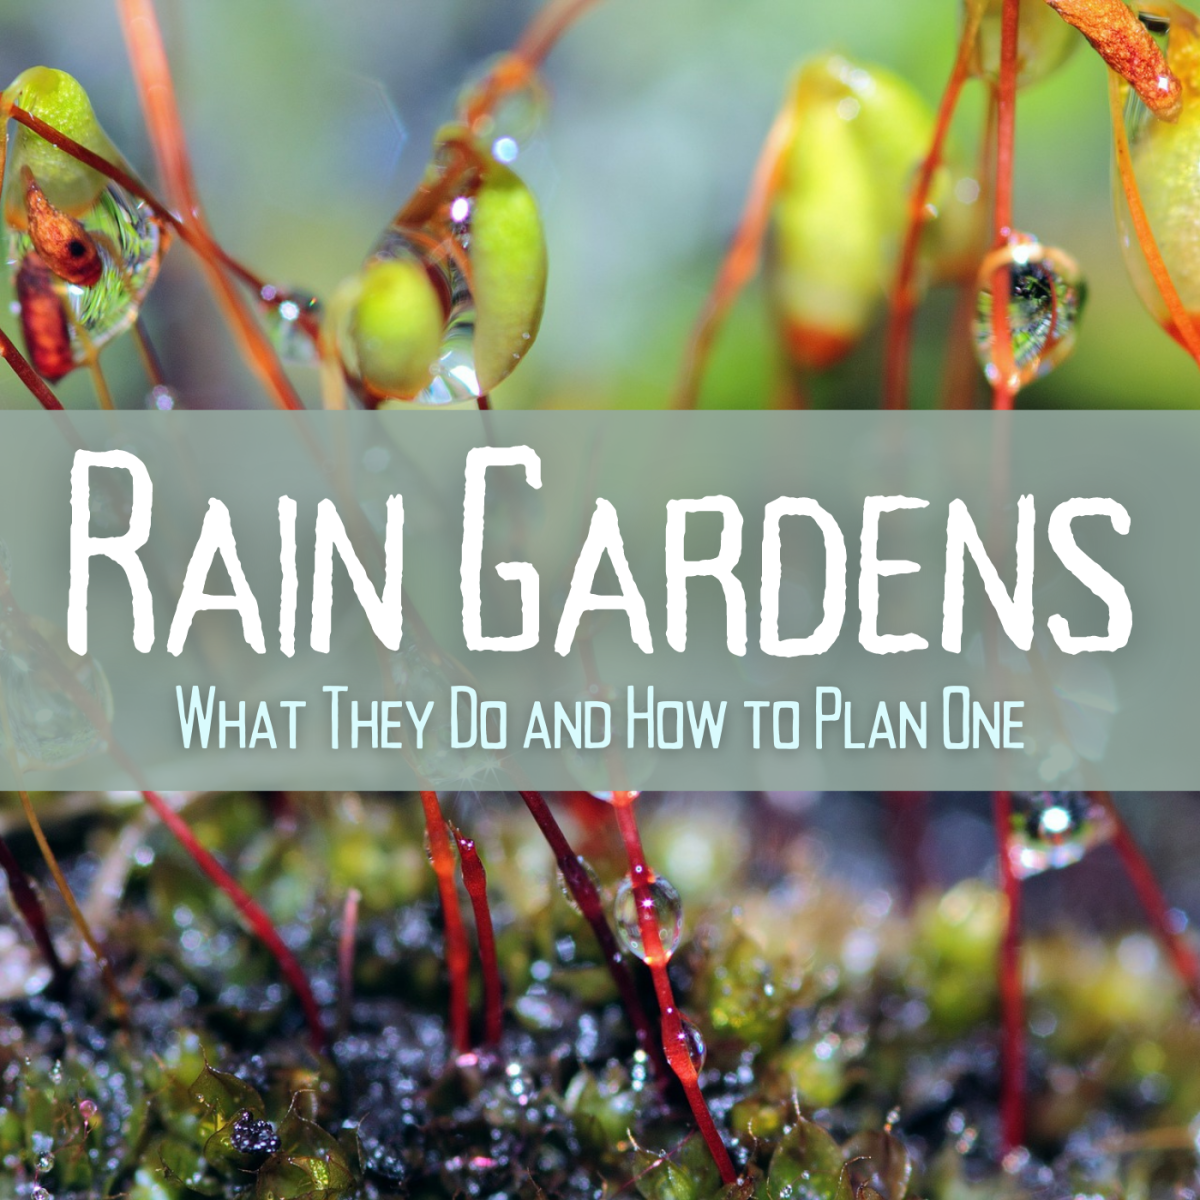 A rain garden encourages the rain to tarry. Learn more about the purpose and benefits of these gardens, and get advice on planning one.